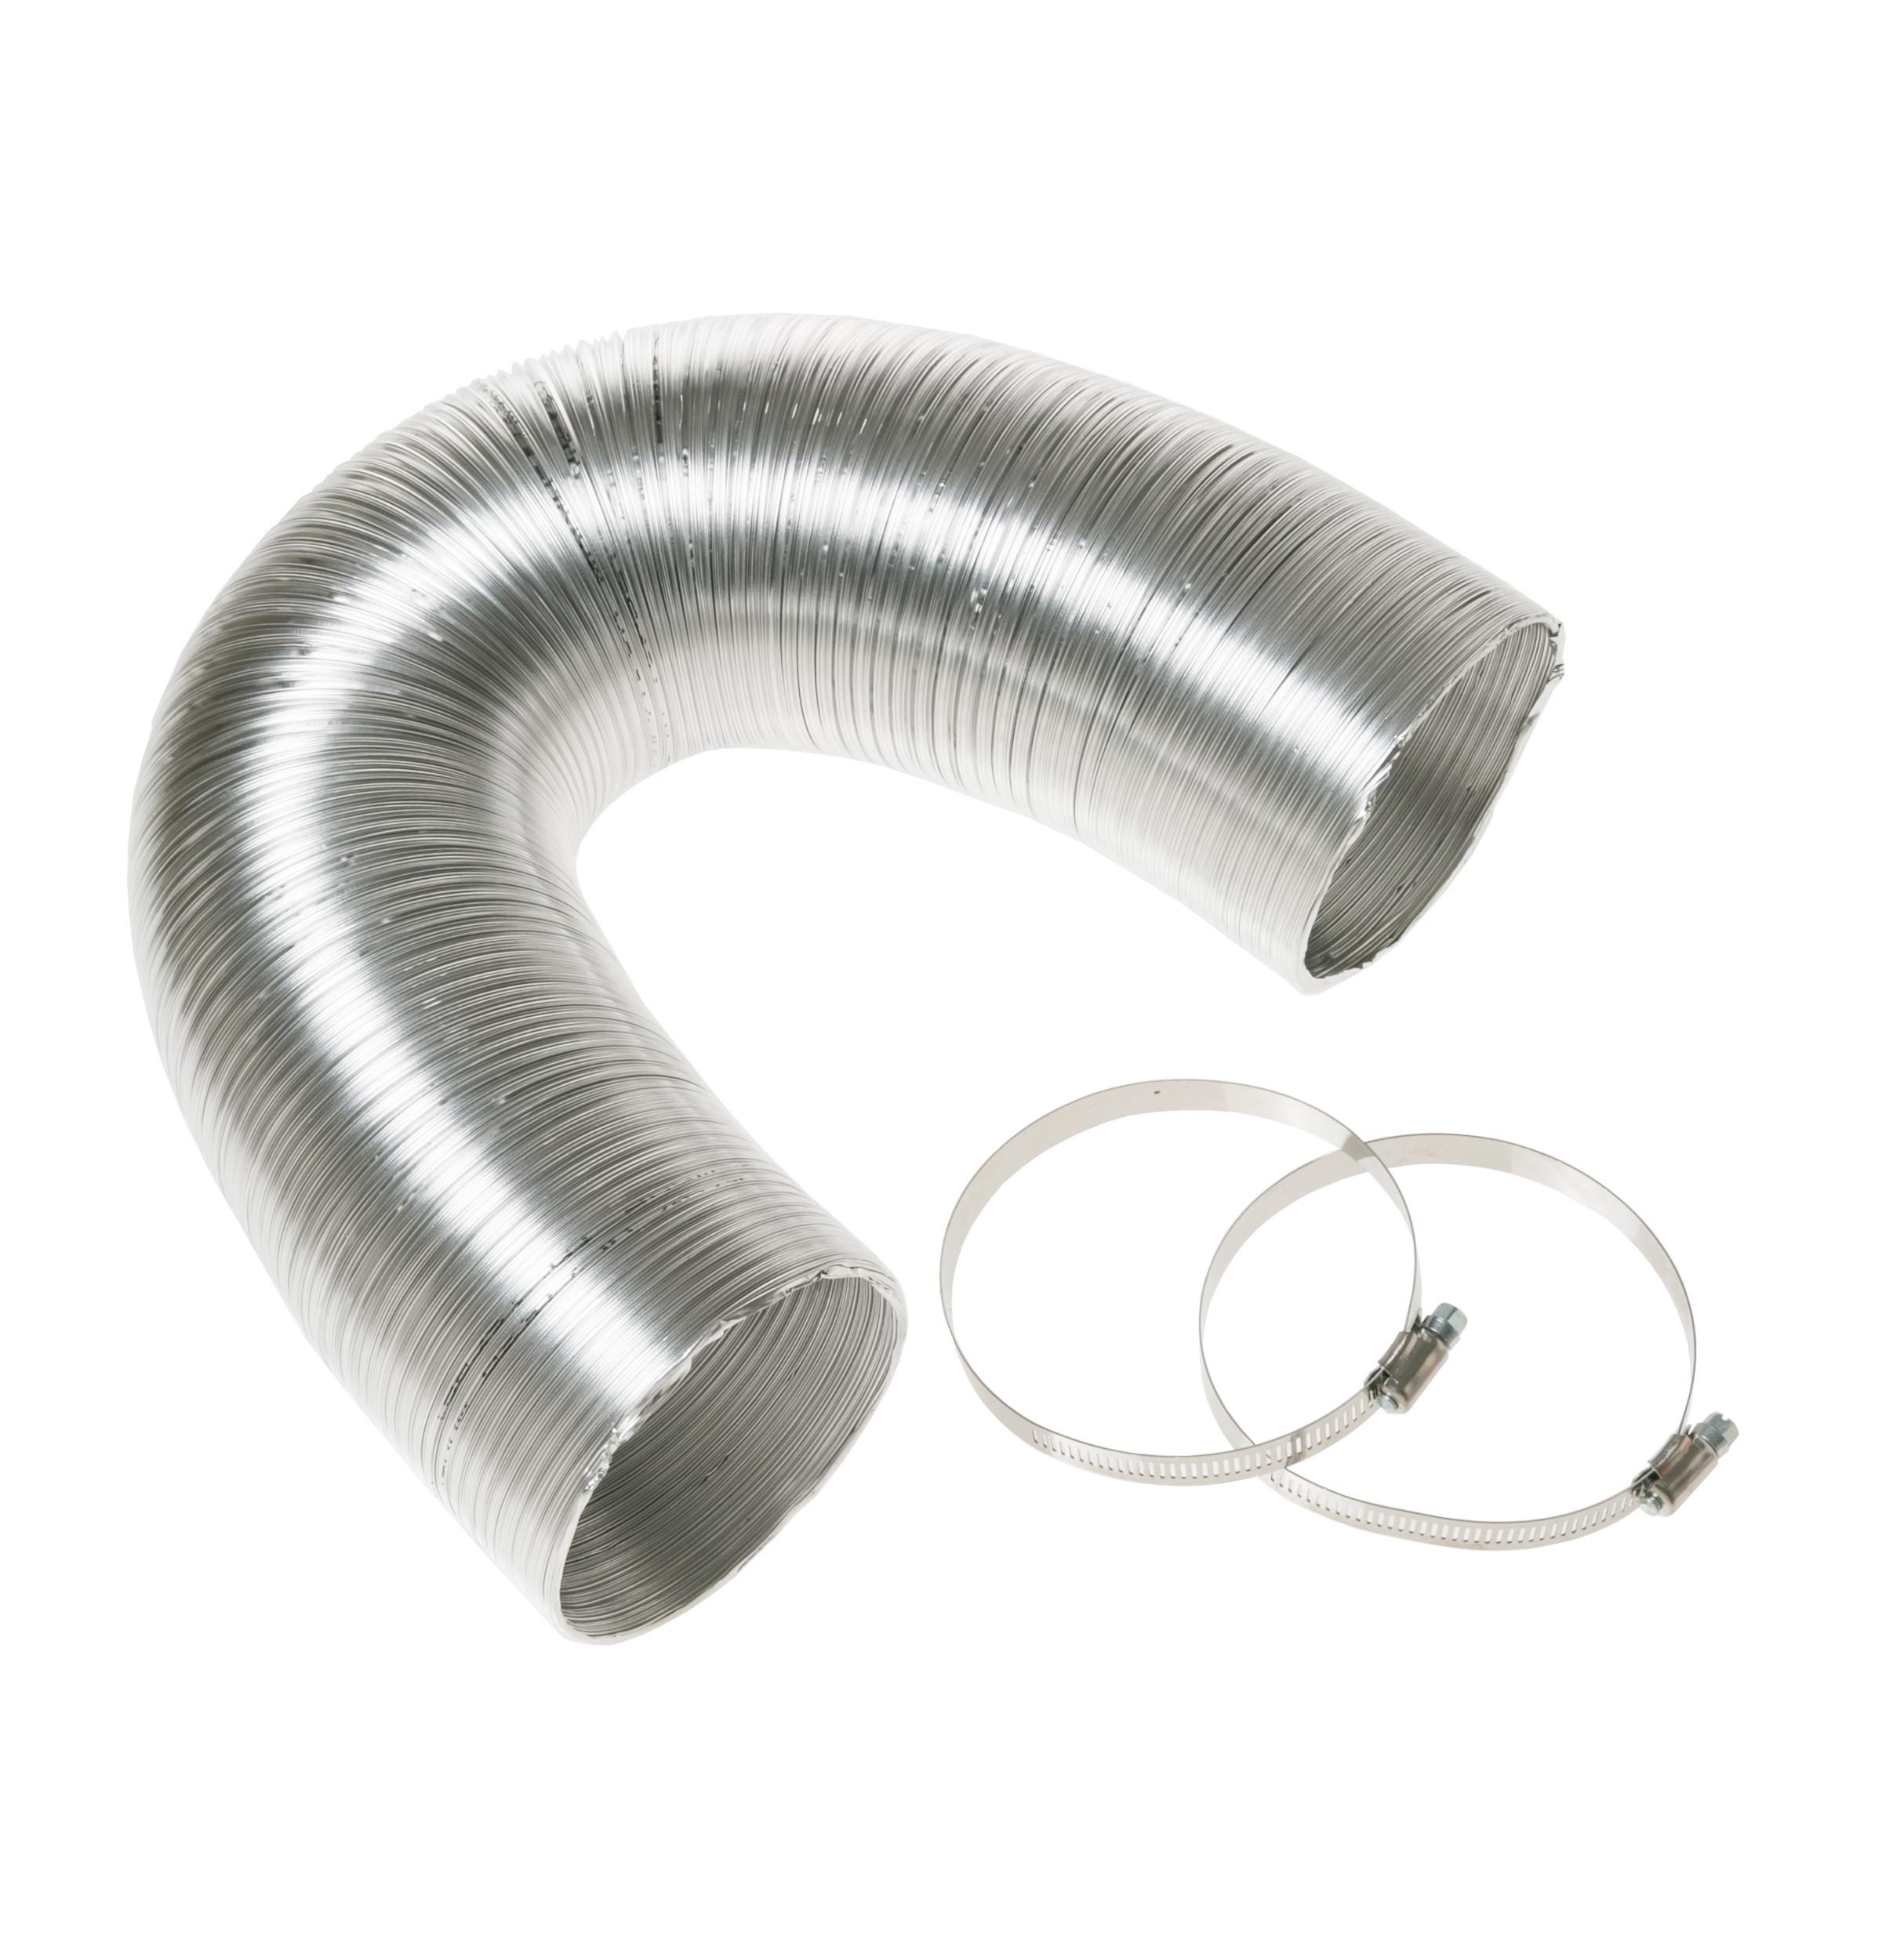 8' Semi-Rigid Dryer Vent Kit, with 2 Elbows Stainless Steel-5304492448